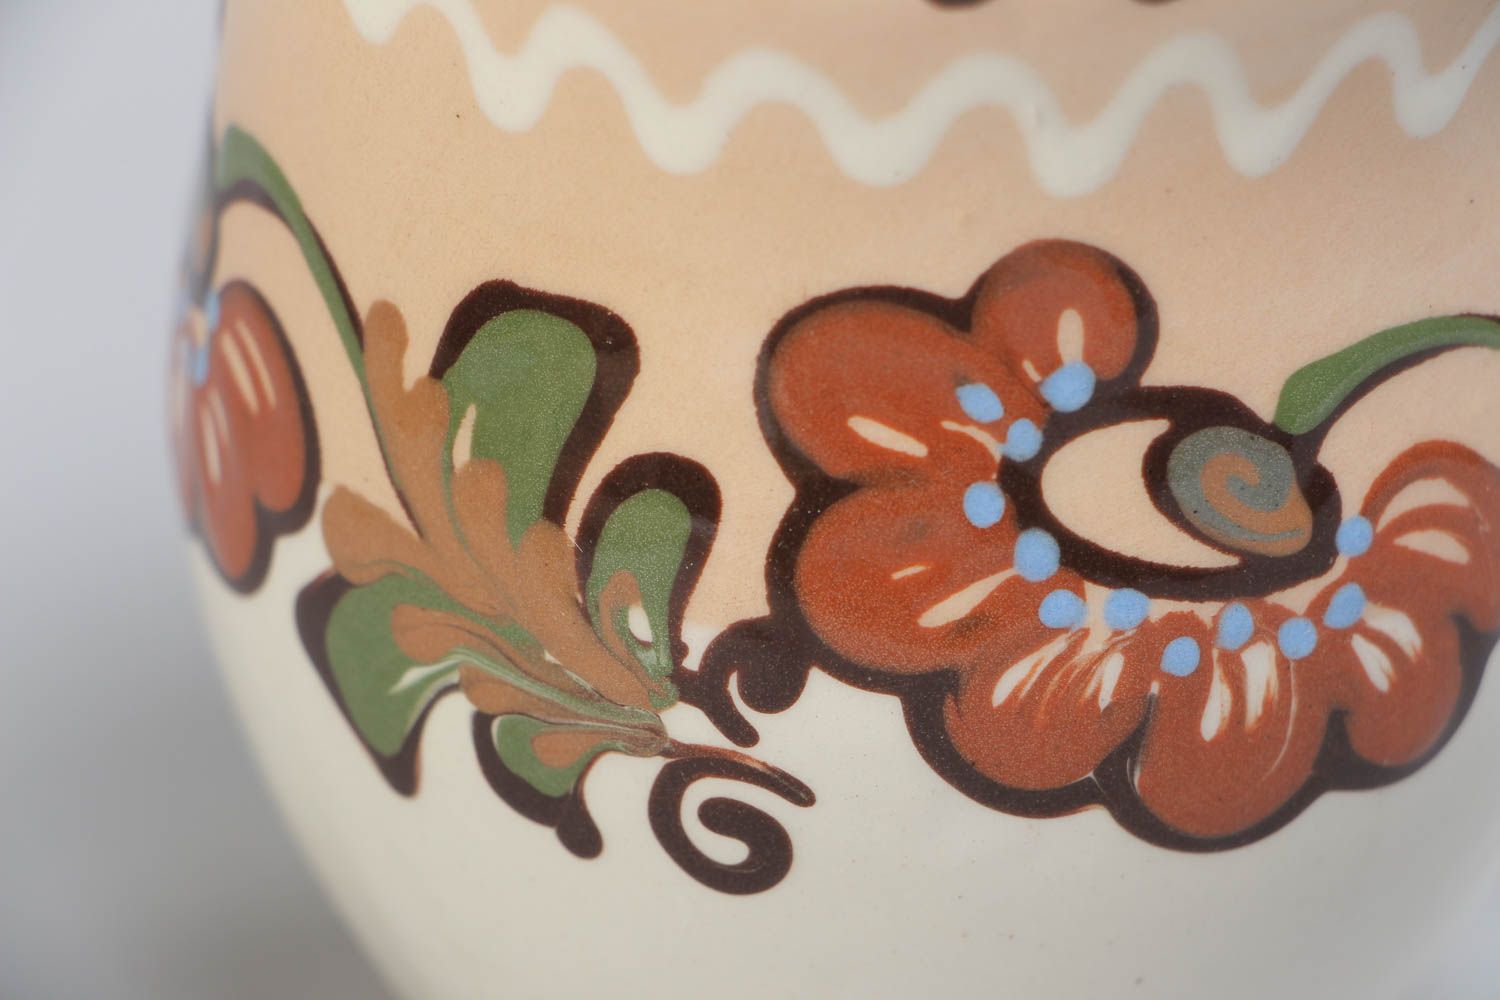 8,5 oz village-style clay floral glazed coffee cup 0,82 lb photo 3